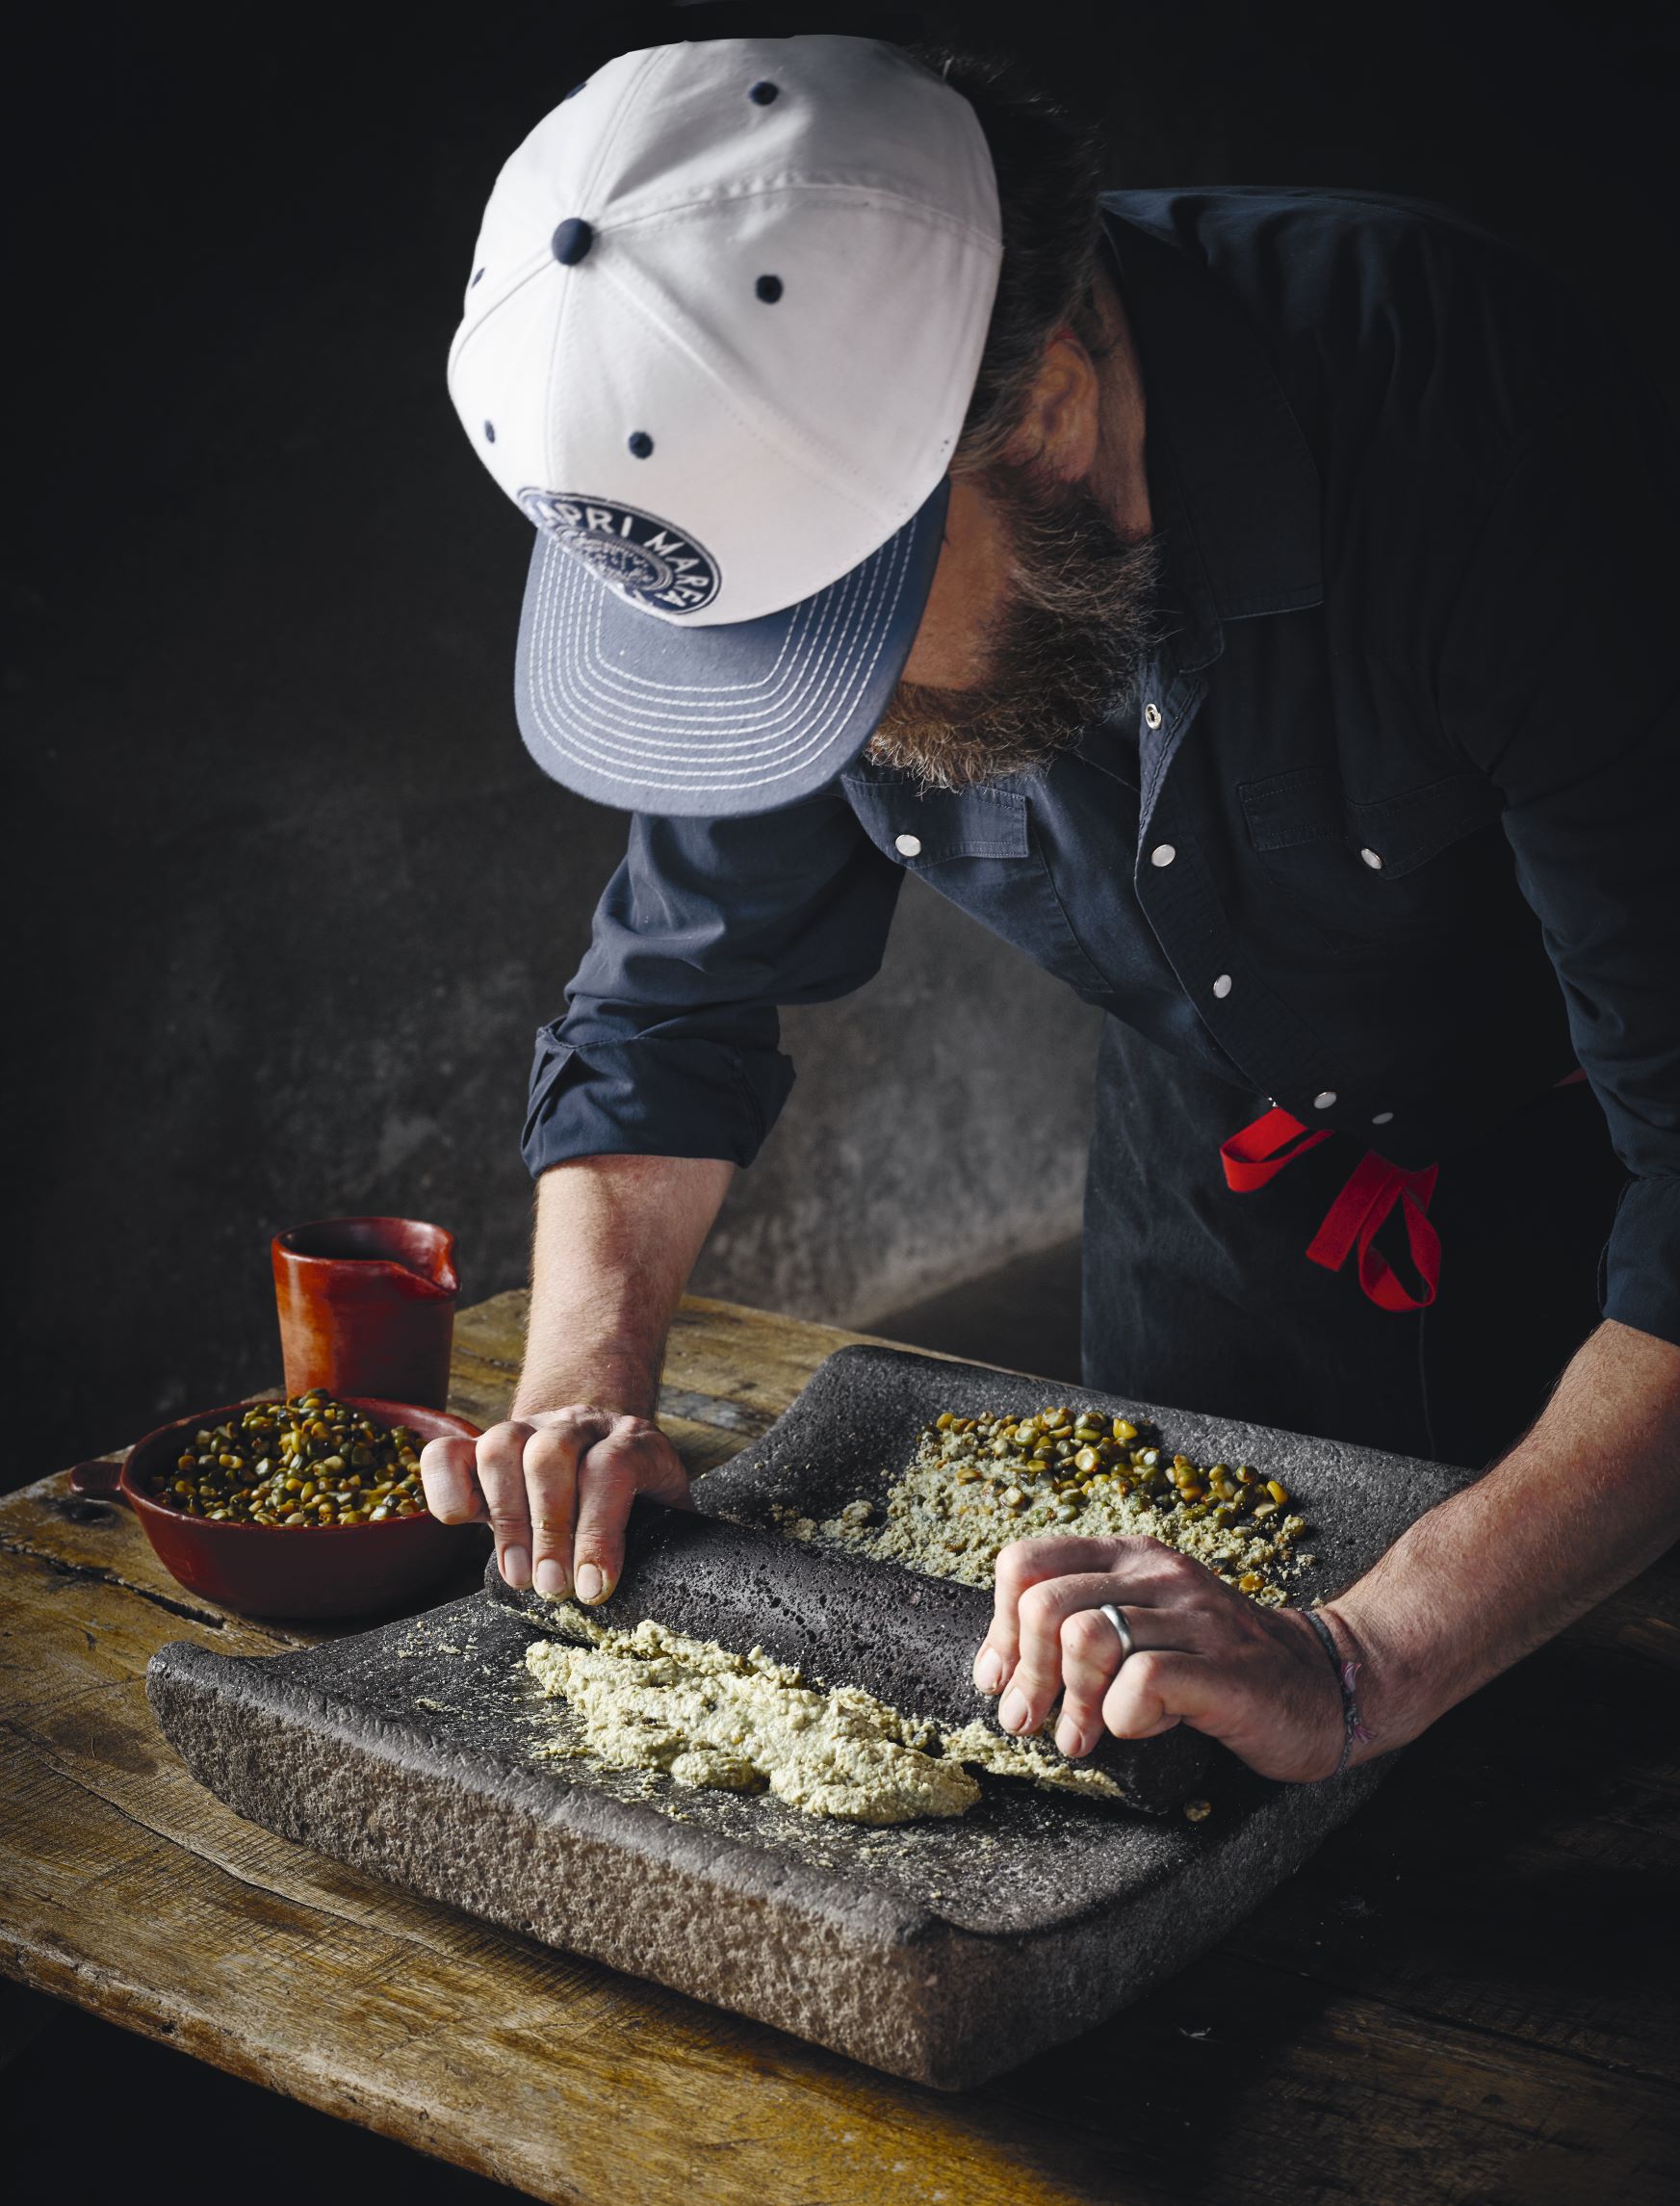 Rocky Barnette, chef at The Capri in Marfa, Texas, turns corn into masa using a traditional metate. As featured in Cooking In Marfa: Welcome, We've Been Expecting You